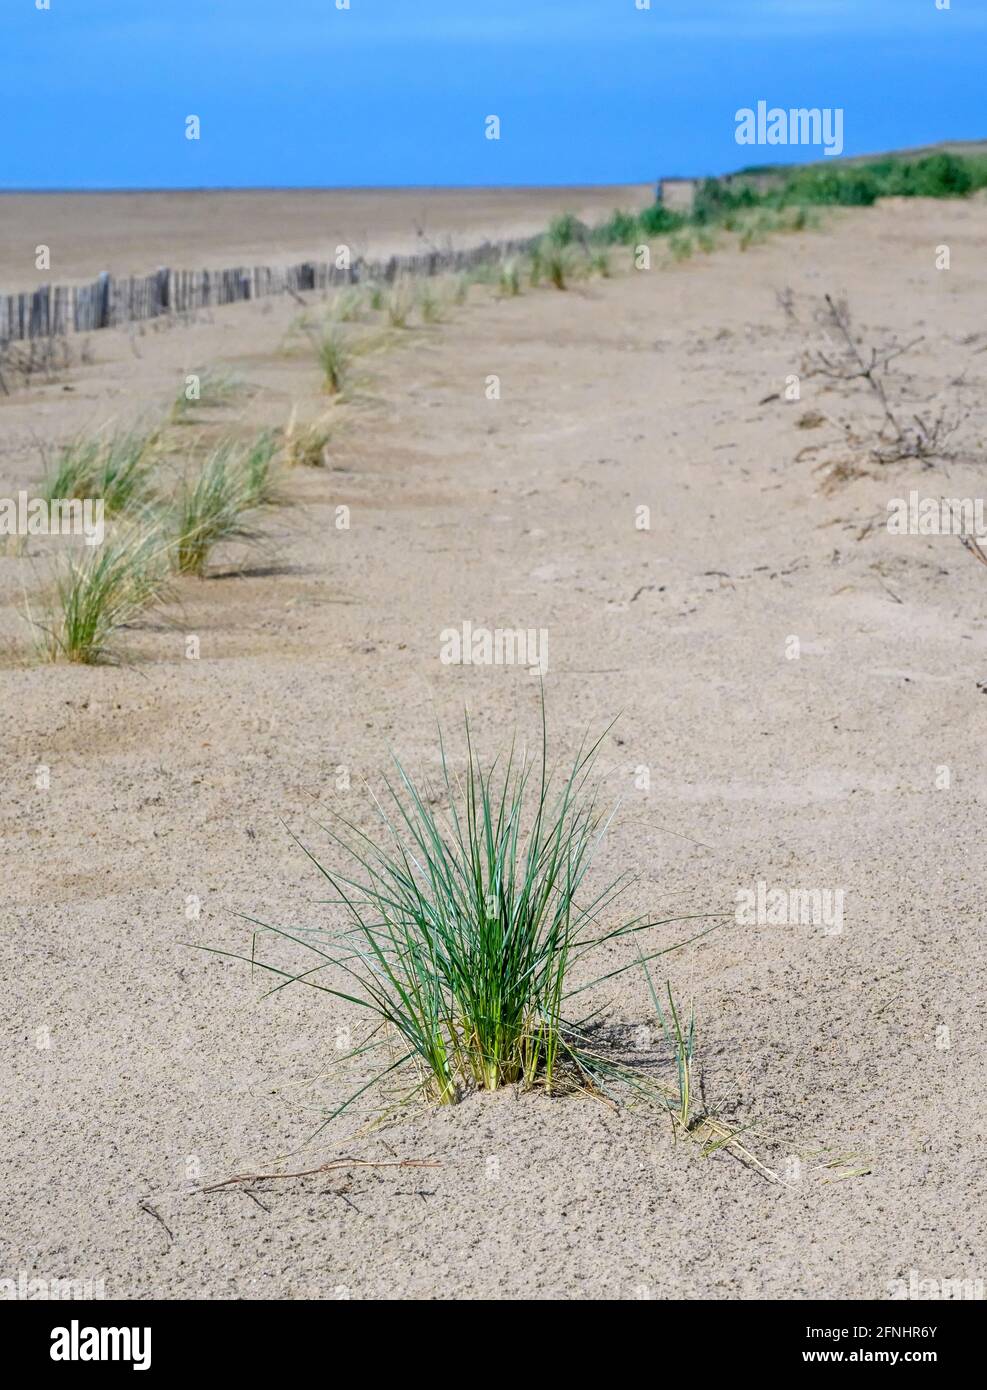 Clump of Lyme Grass (Leymus arenarius) also known as sand ryegrass or sea lyme grass, growing in sand dunes by the beach at St Anne's, Lancashire, UK Stock Photo